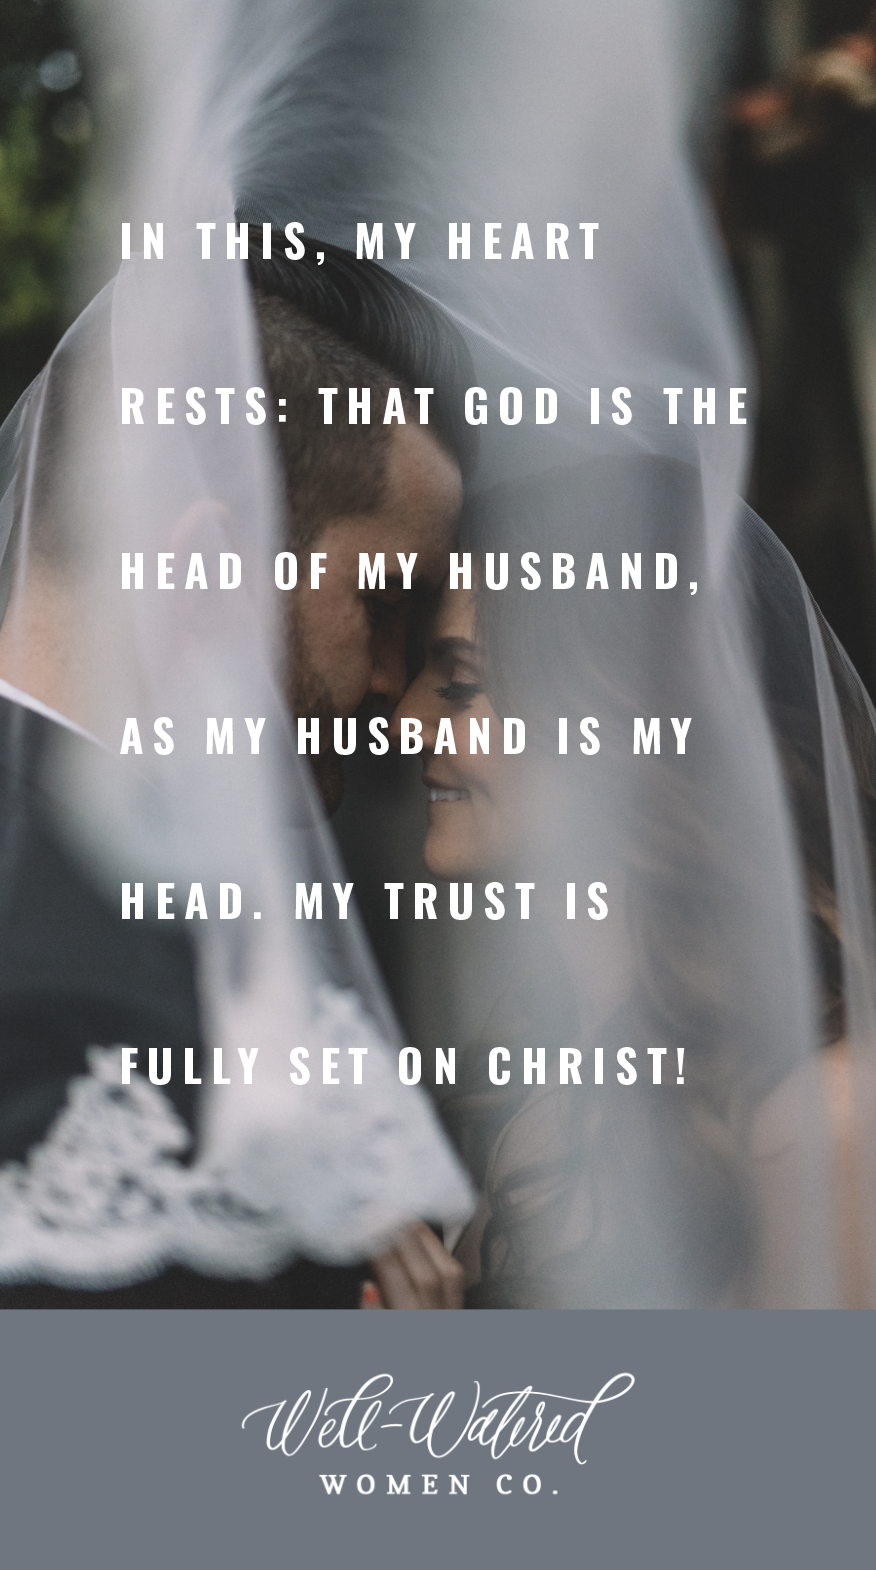 I am fully submitted to Christ when I submit to my husband, who is submitted to Christ.